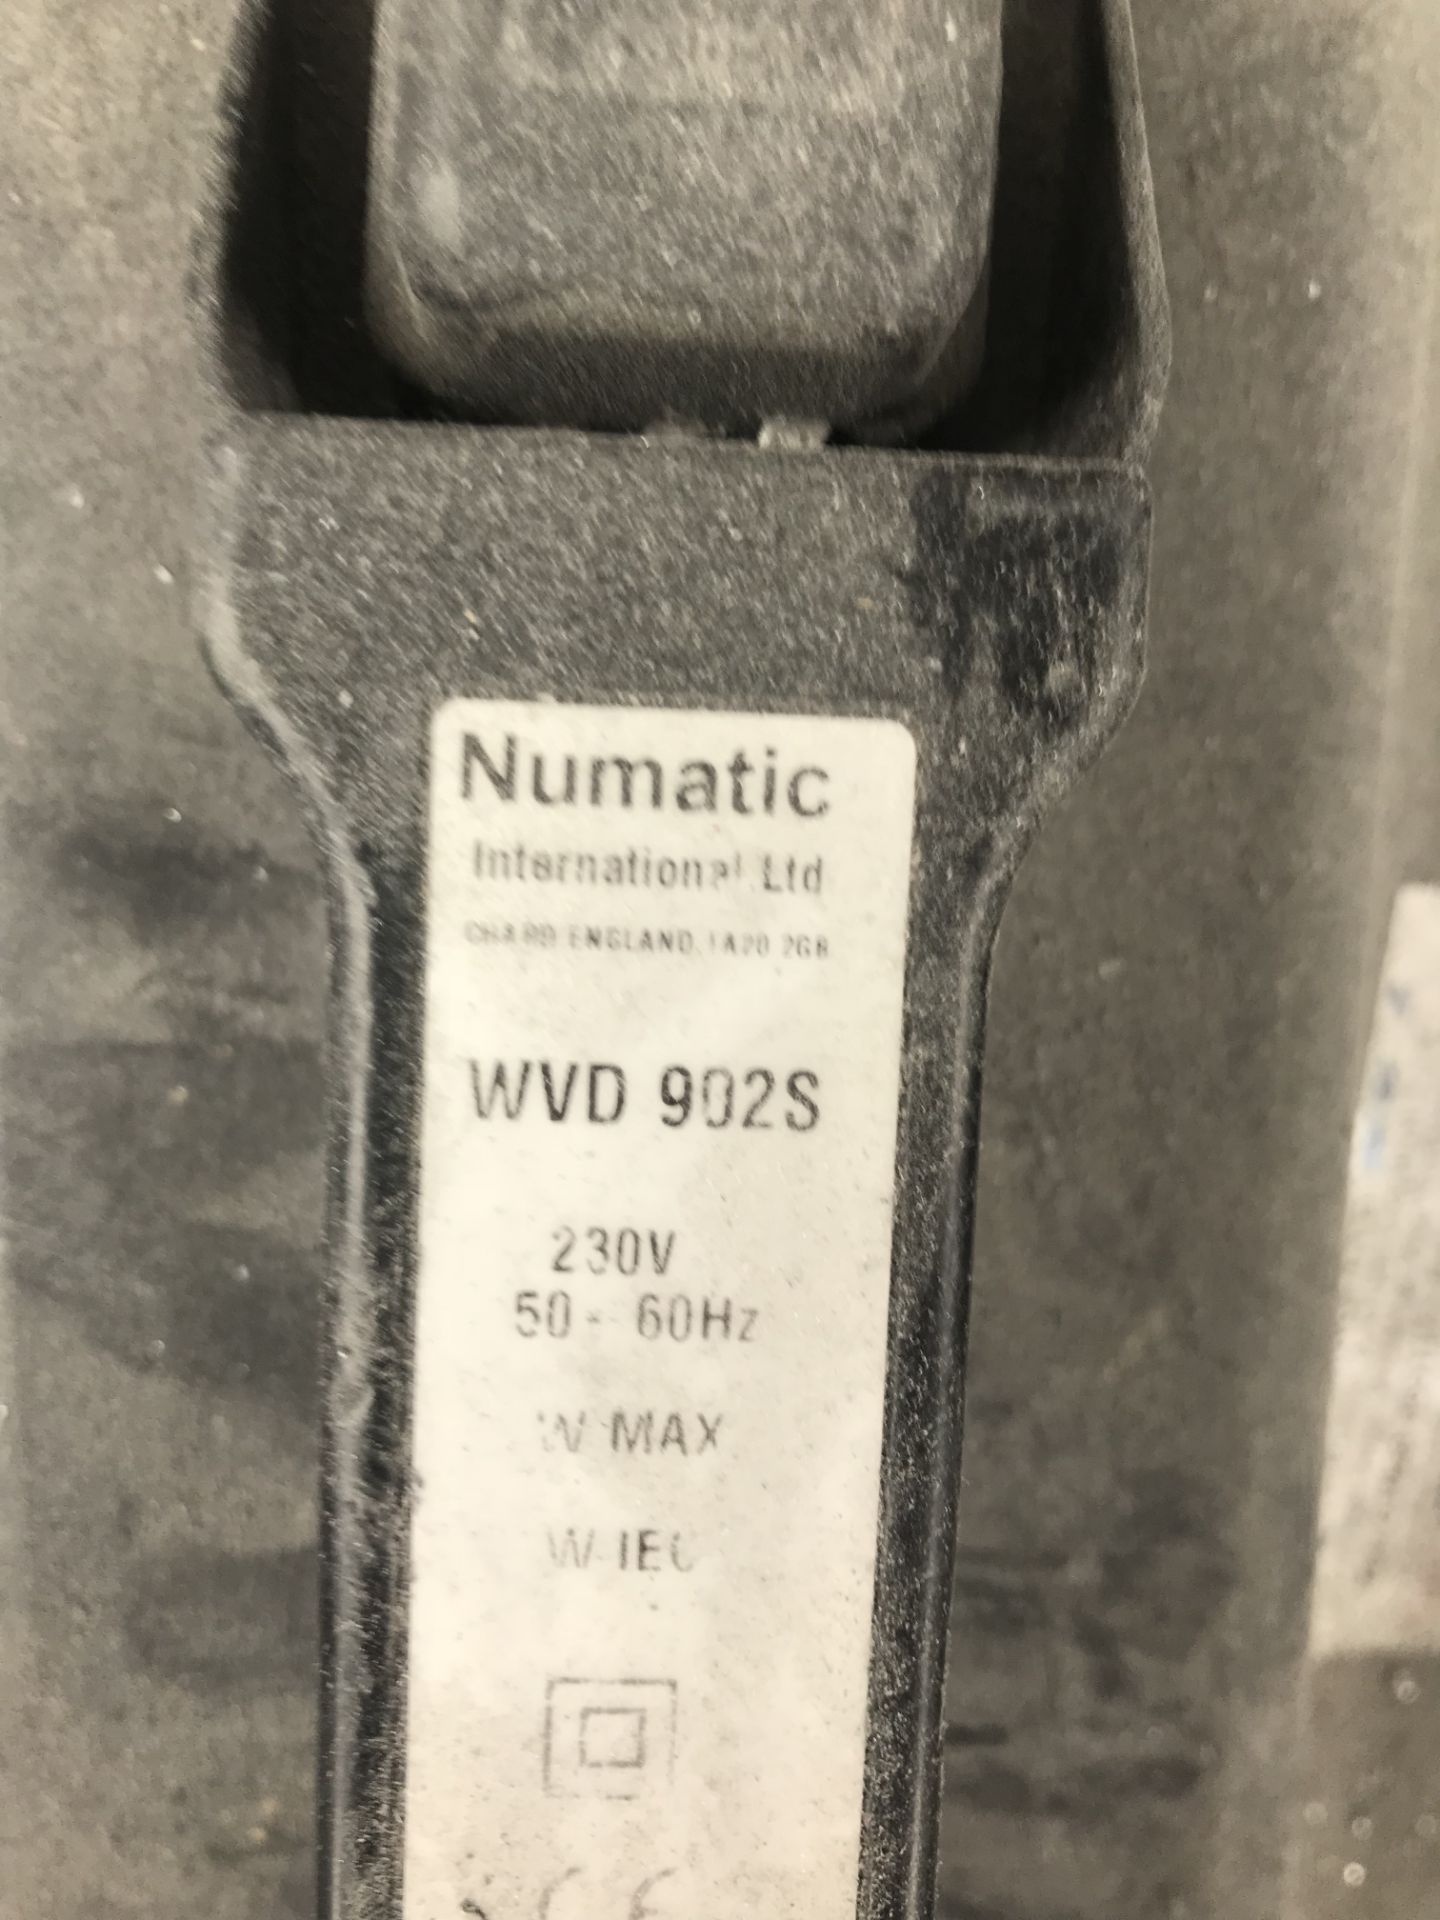 Numatic WVD-902 Wet or Dry Vacuum - Image 2 of 2